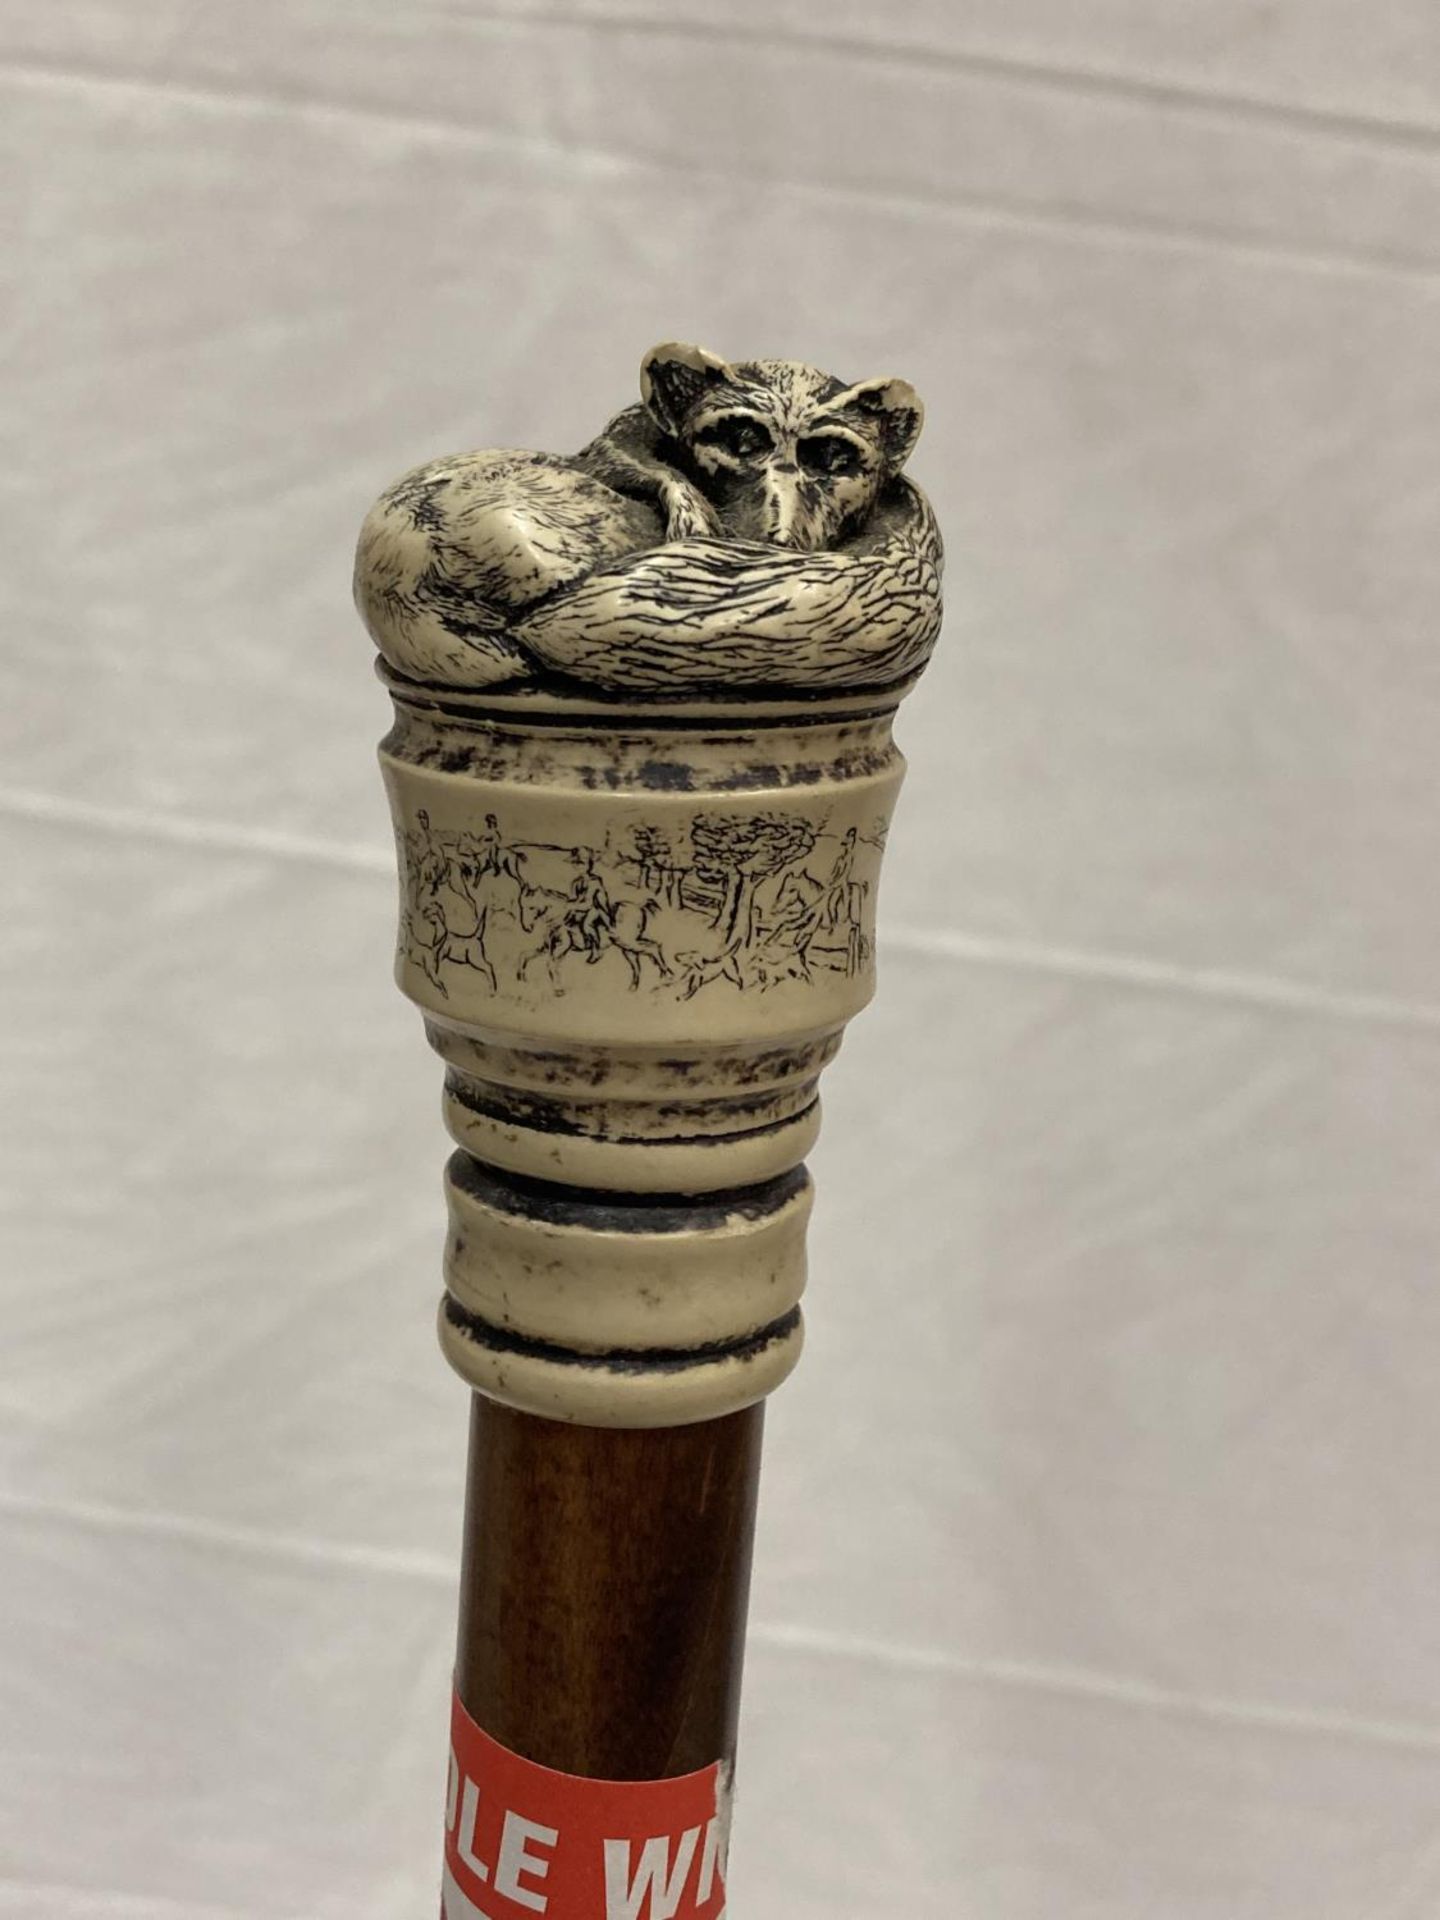 A WALKING CANE WITH A FOX FINIAL AND ENGRAVED HUNTING SCENE - Image 5 of 6